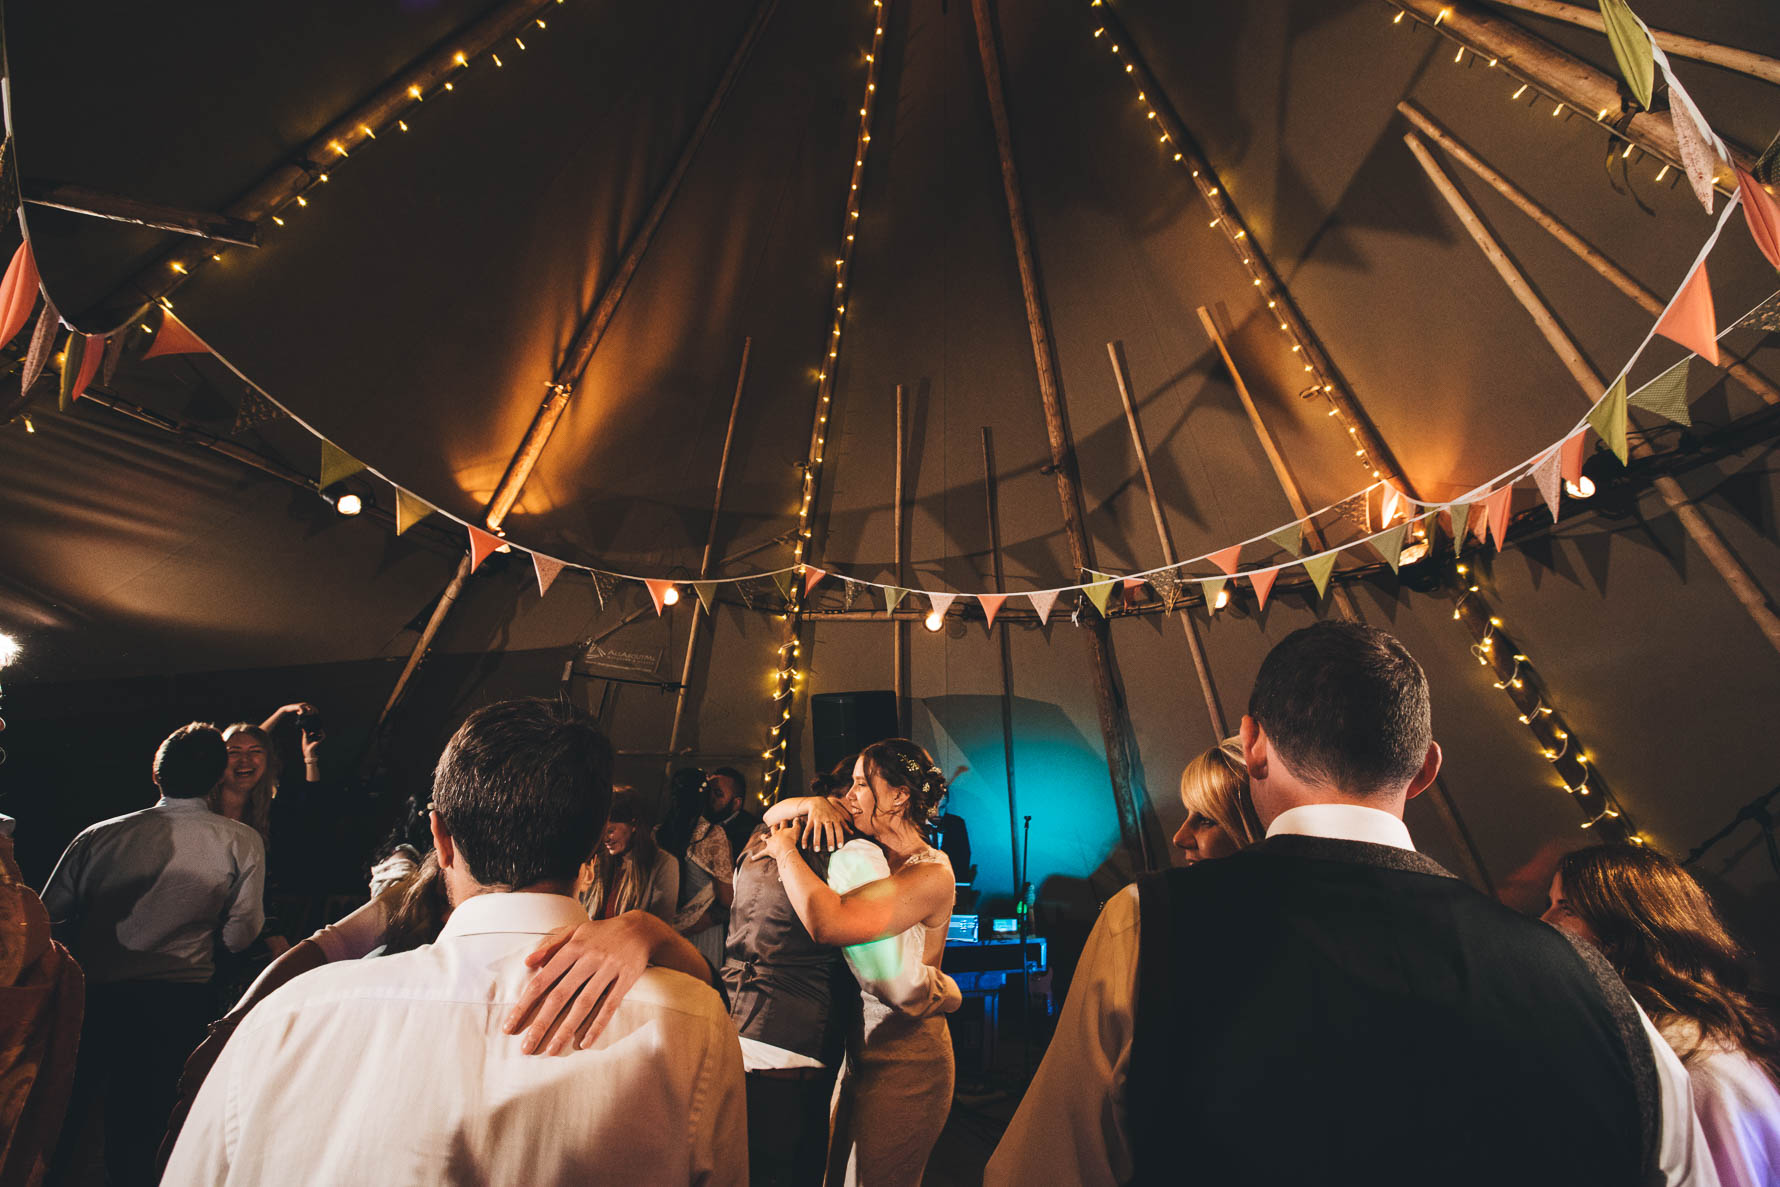 Bride and groom hugging each other on the dancefloor inside a tipi at Red Welly with bunting and fairylights draped around the supports of the tipi